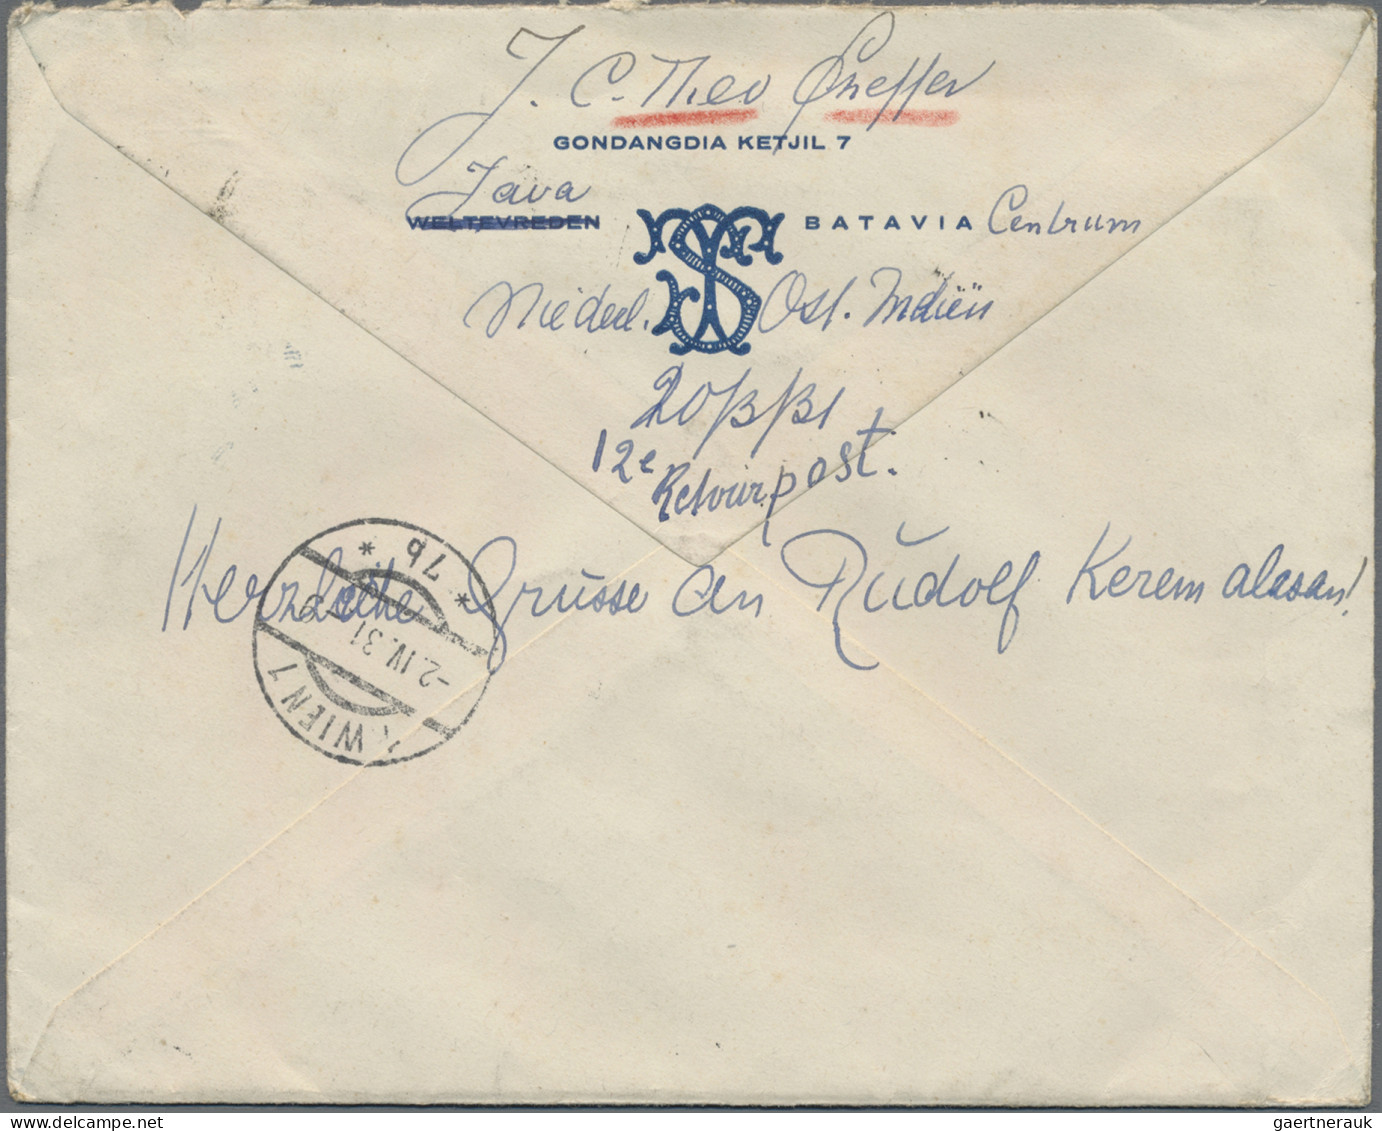 Dutch India: 1922-32: Group of 11 covers to Austria, with a wide range of postma